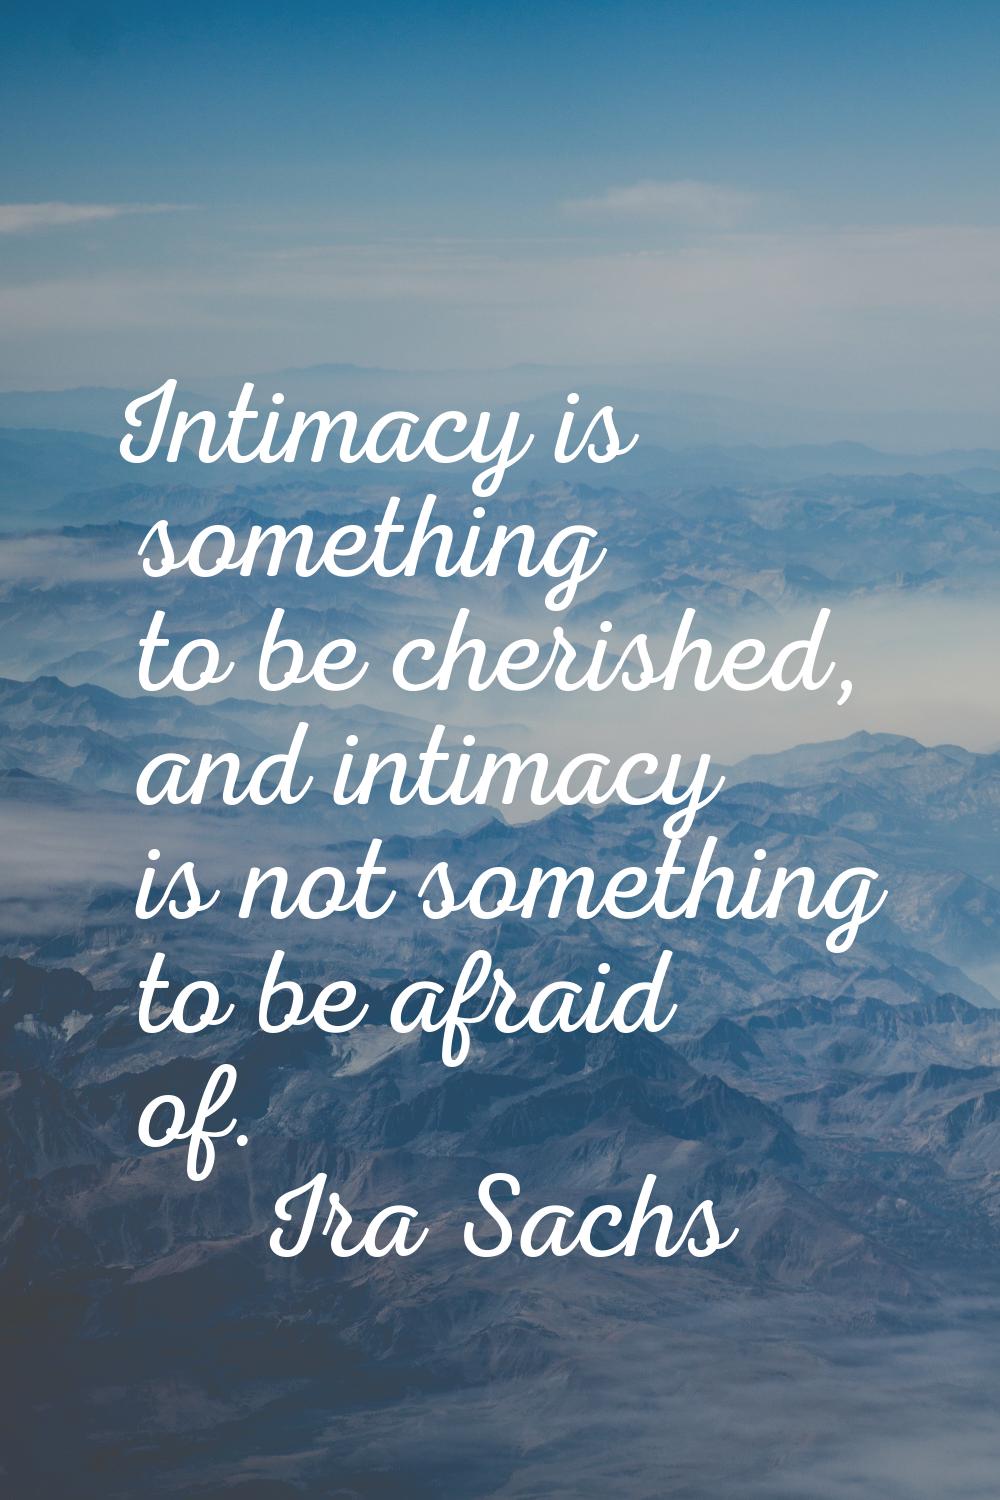 Intimacy is something to be cherished, and intimacy is not something to be afraid of.